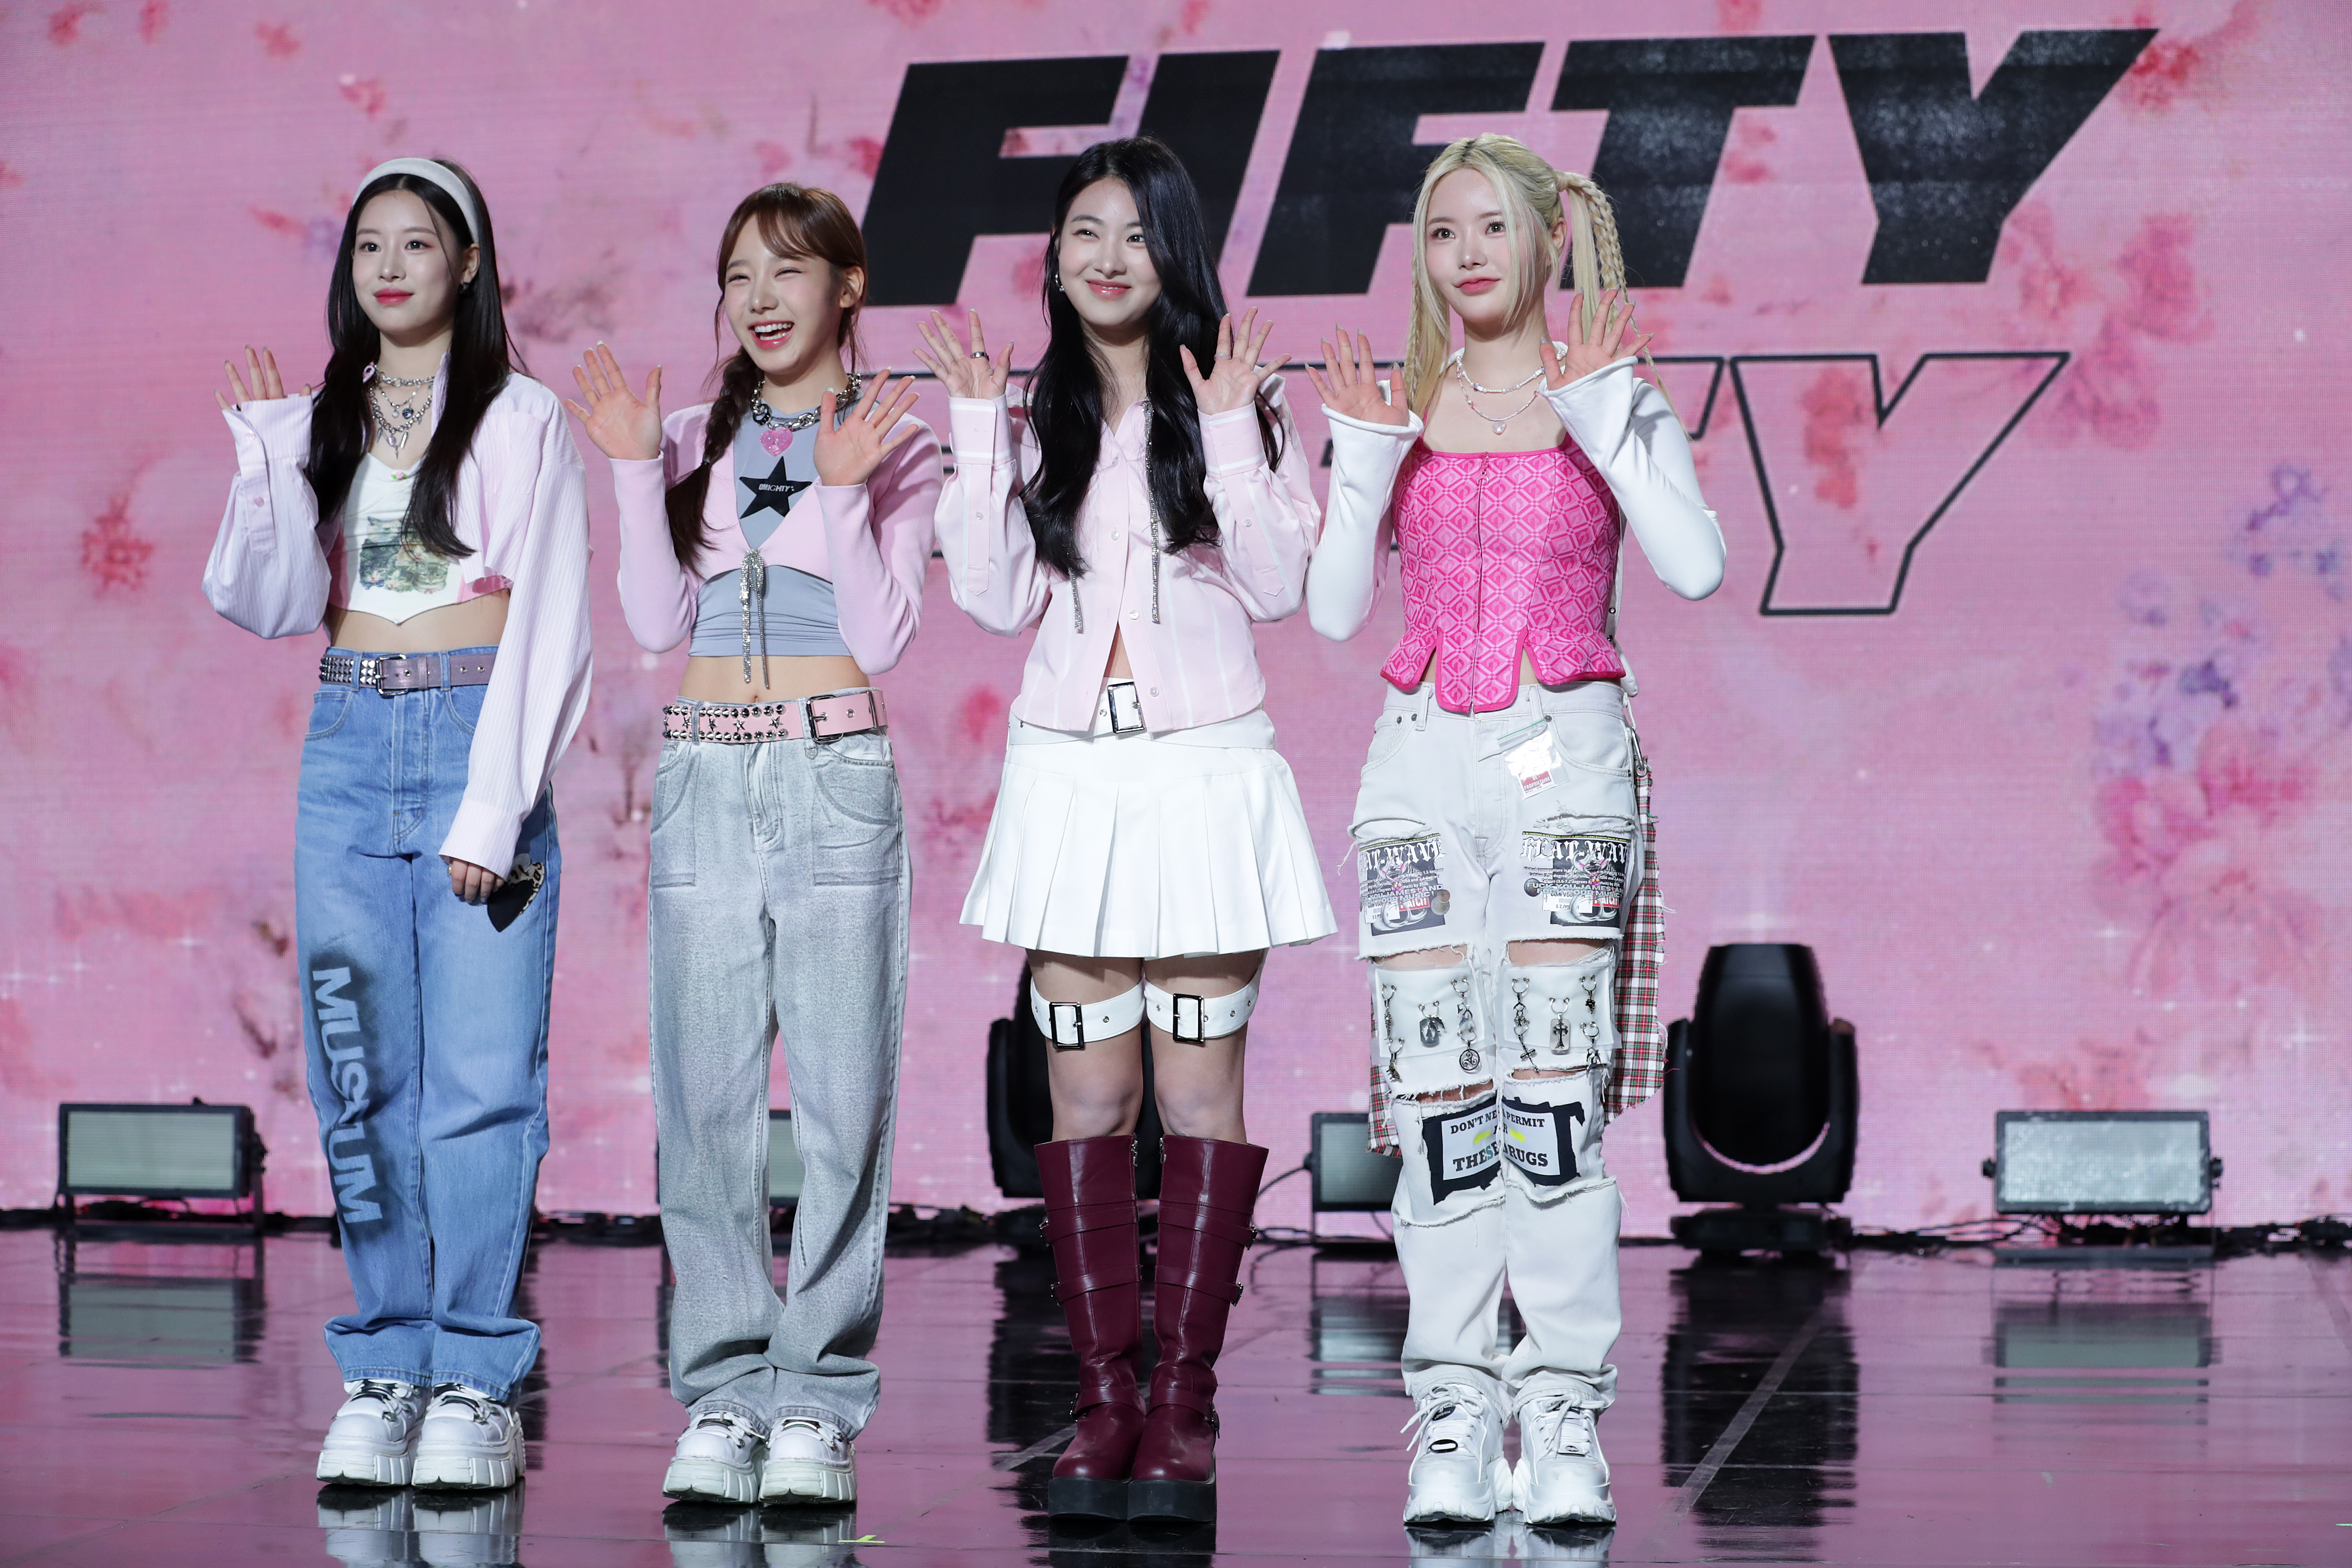 K-pop group FIFTY FIFTY makes history on the Billboard Hot 100 chart